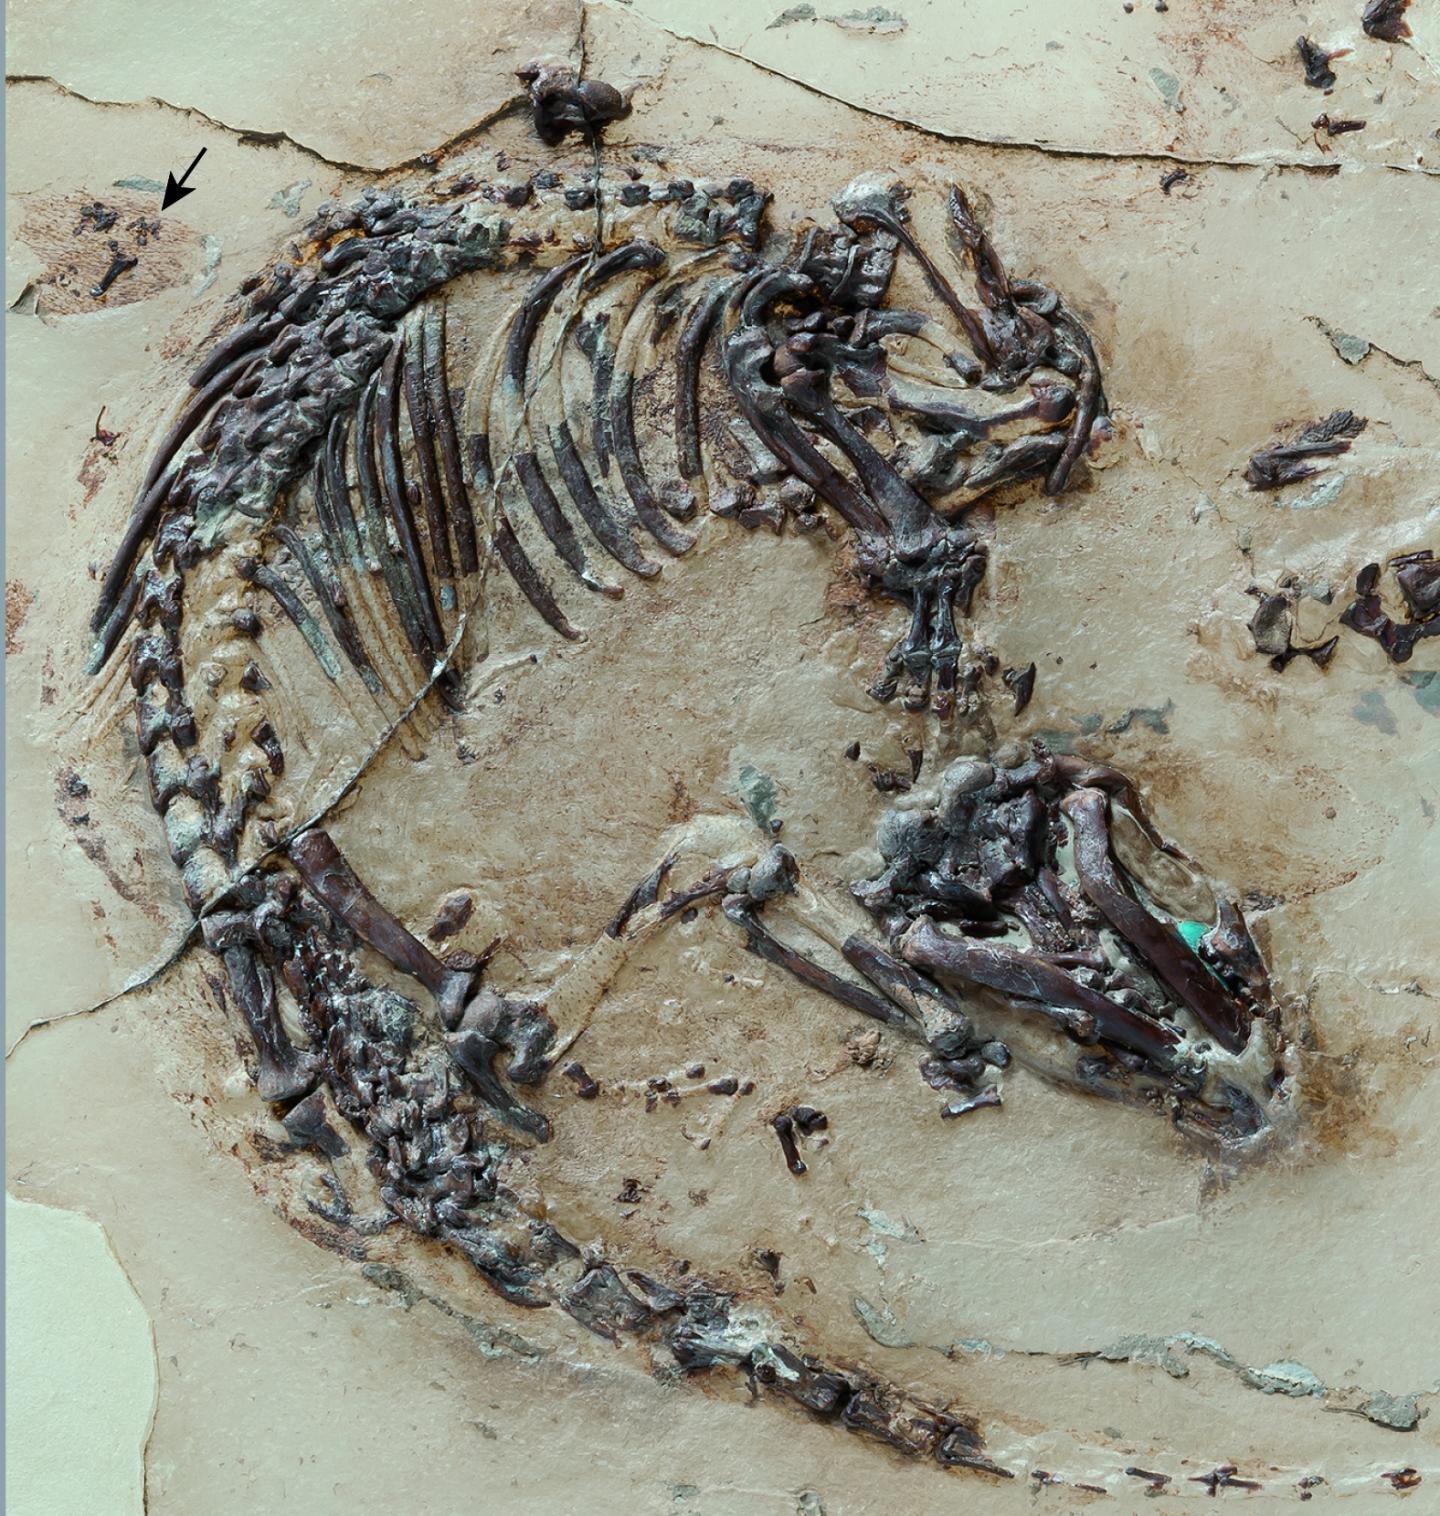 Skeleton of the Cretaceous Mammal <i>Spinolestes</i> with Preserved Fur Shadows